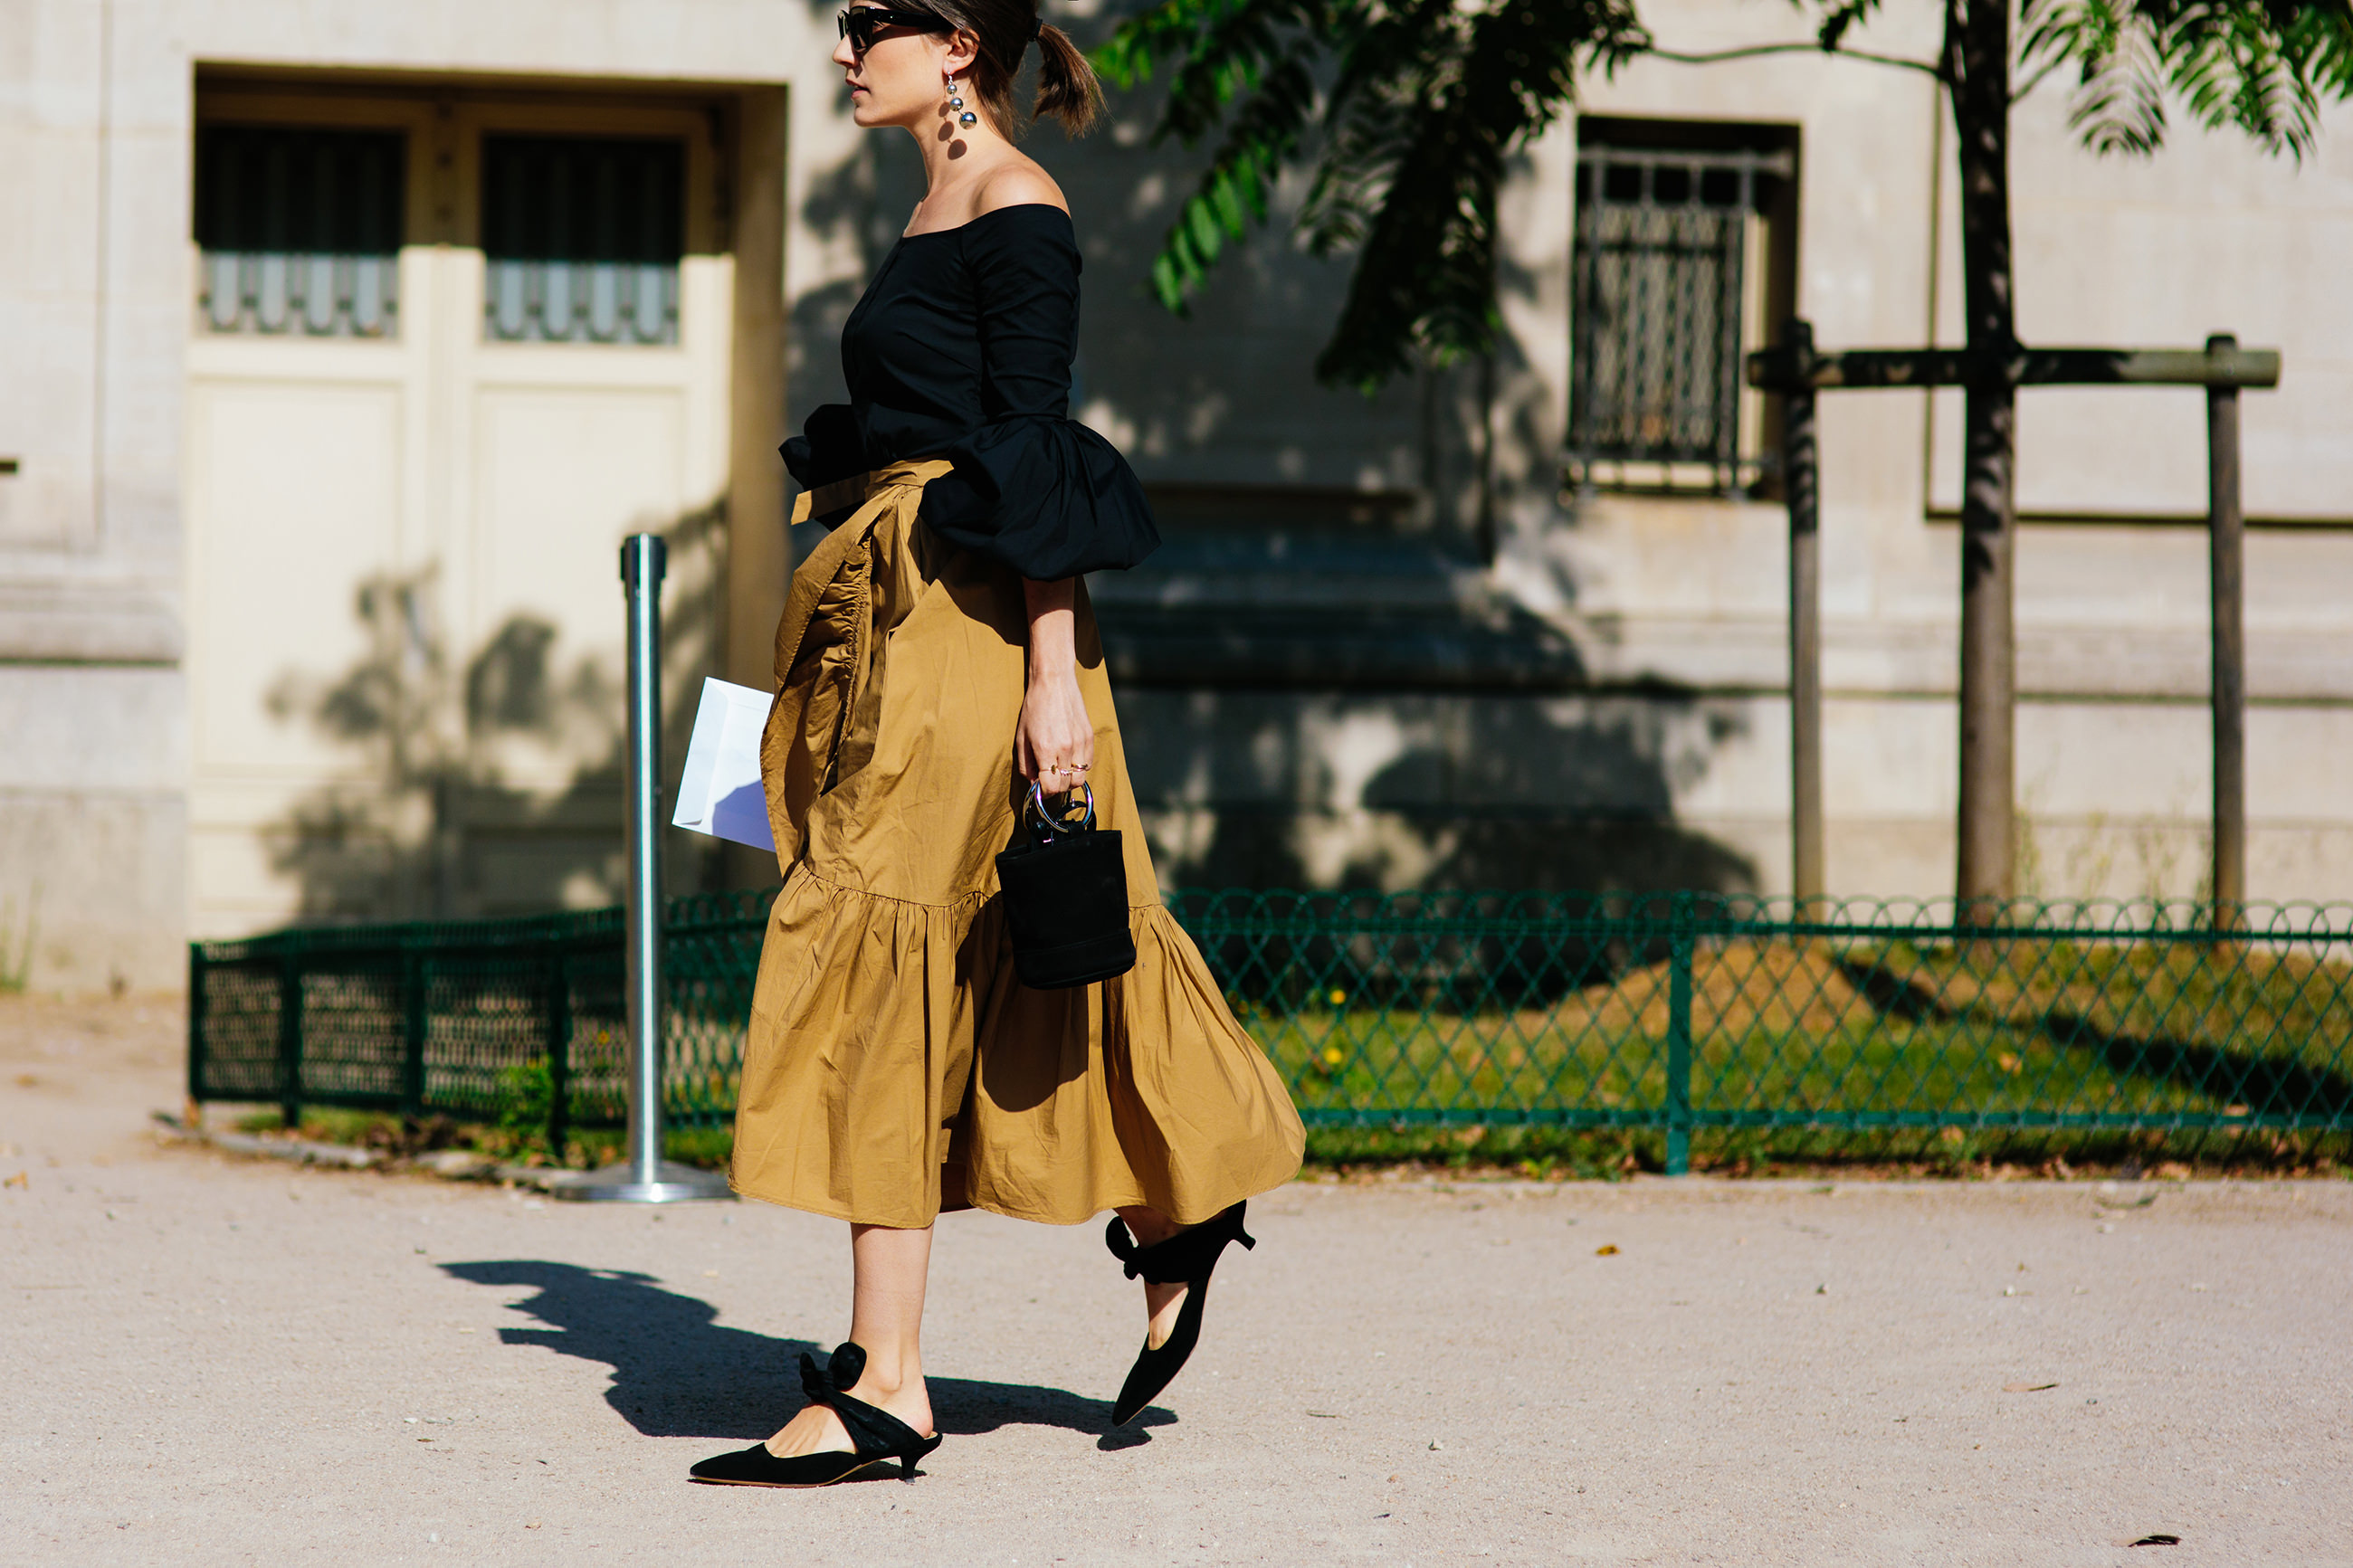 Blogger Carola Pojer wearing a black top and brown ruffled skirt before Chanel Haute Couture fashion show in Paris, France